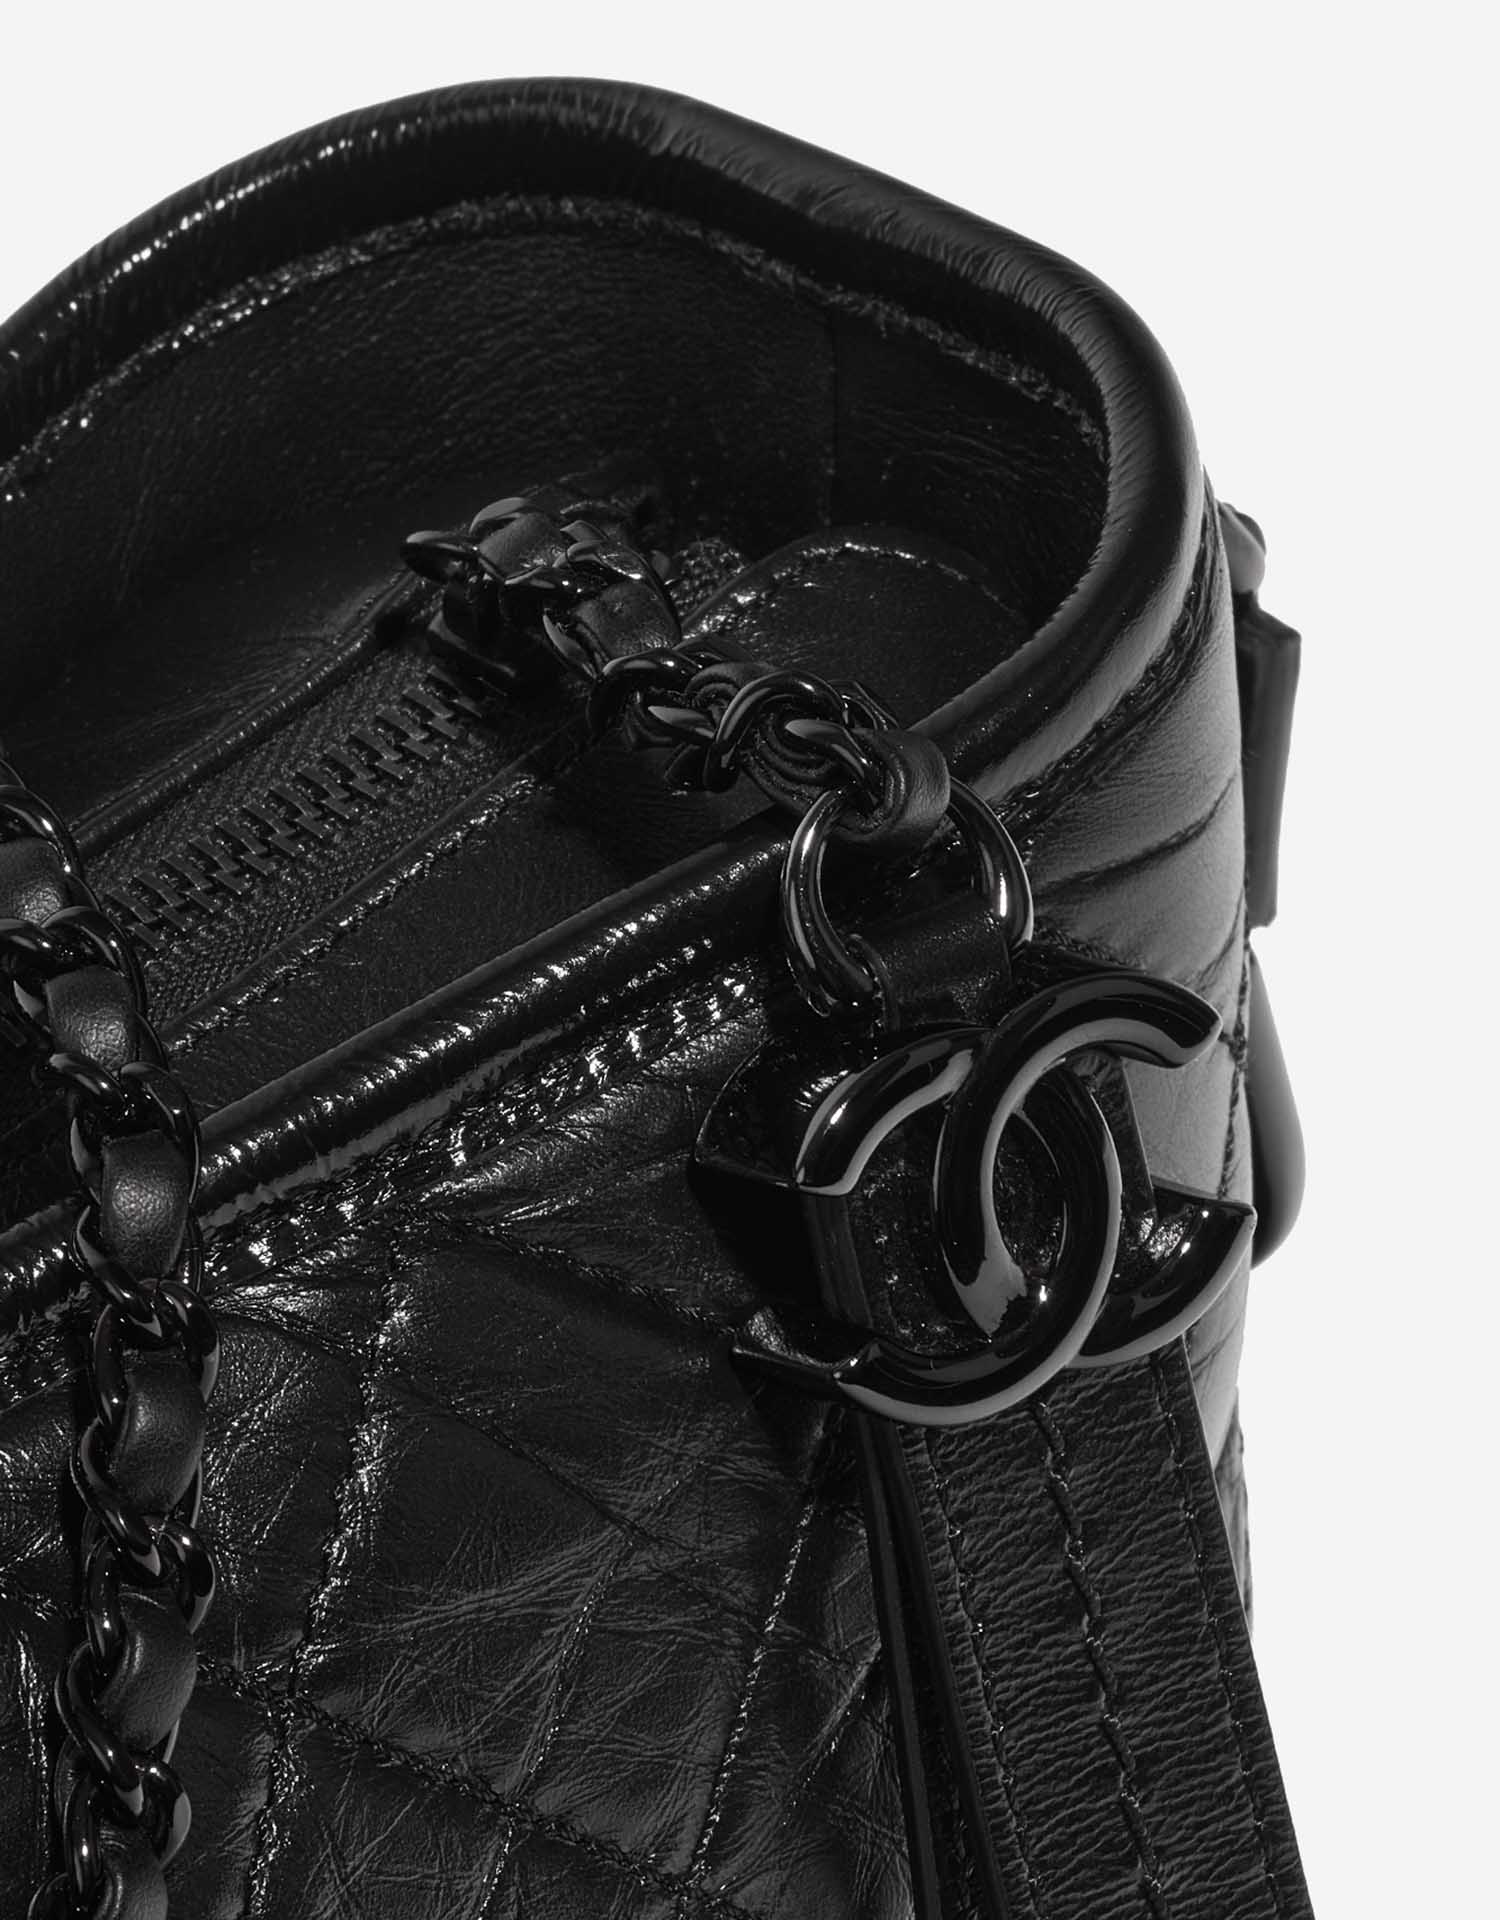 Pre-owned Chanel bag Gabrielle Large Calf Black Black Closing System | Sell your designer bag on Saclab.com